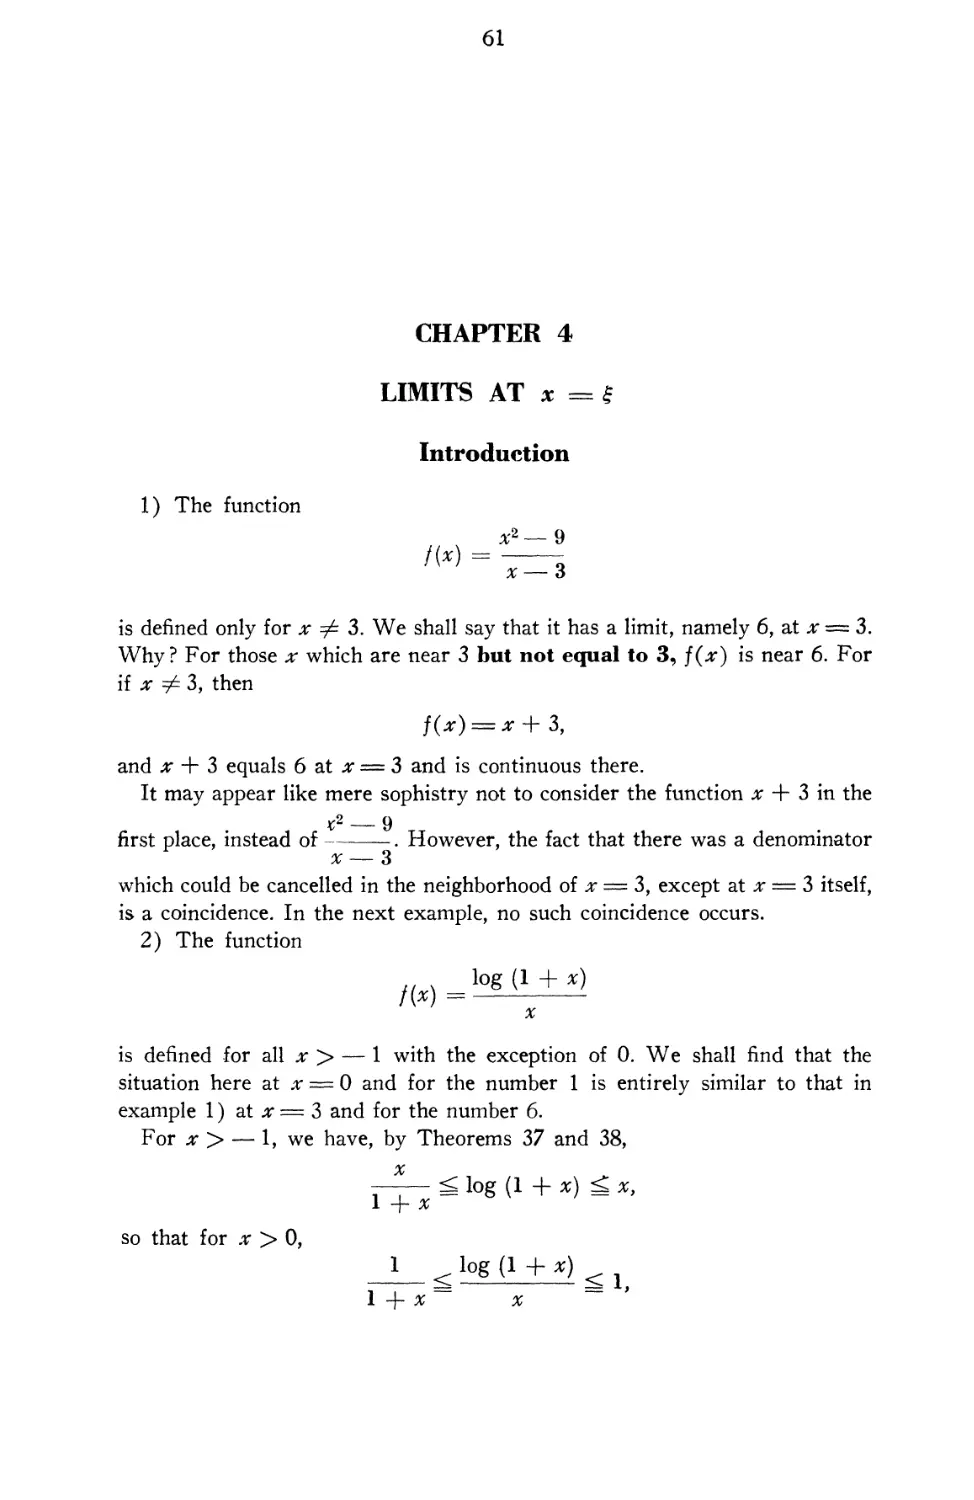 Chapter 4 Limits as $x=\xi$